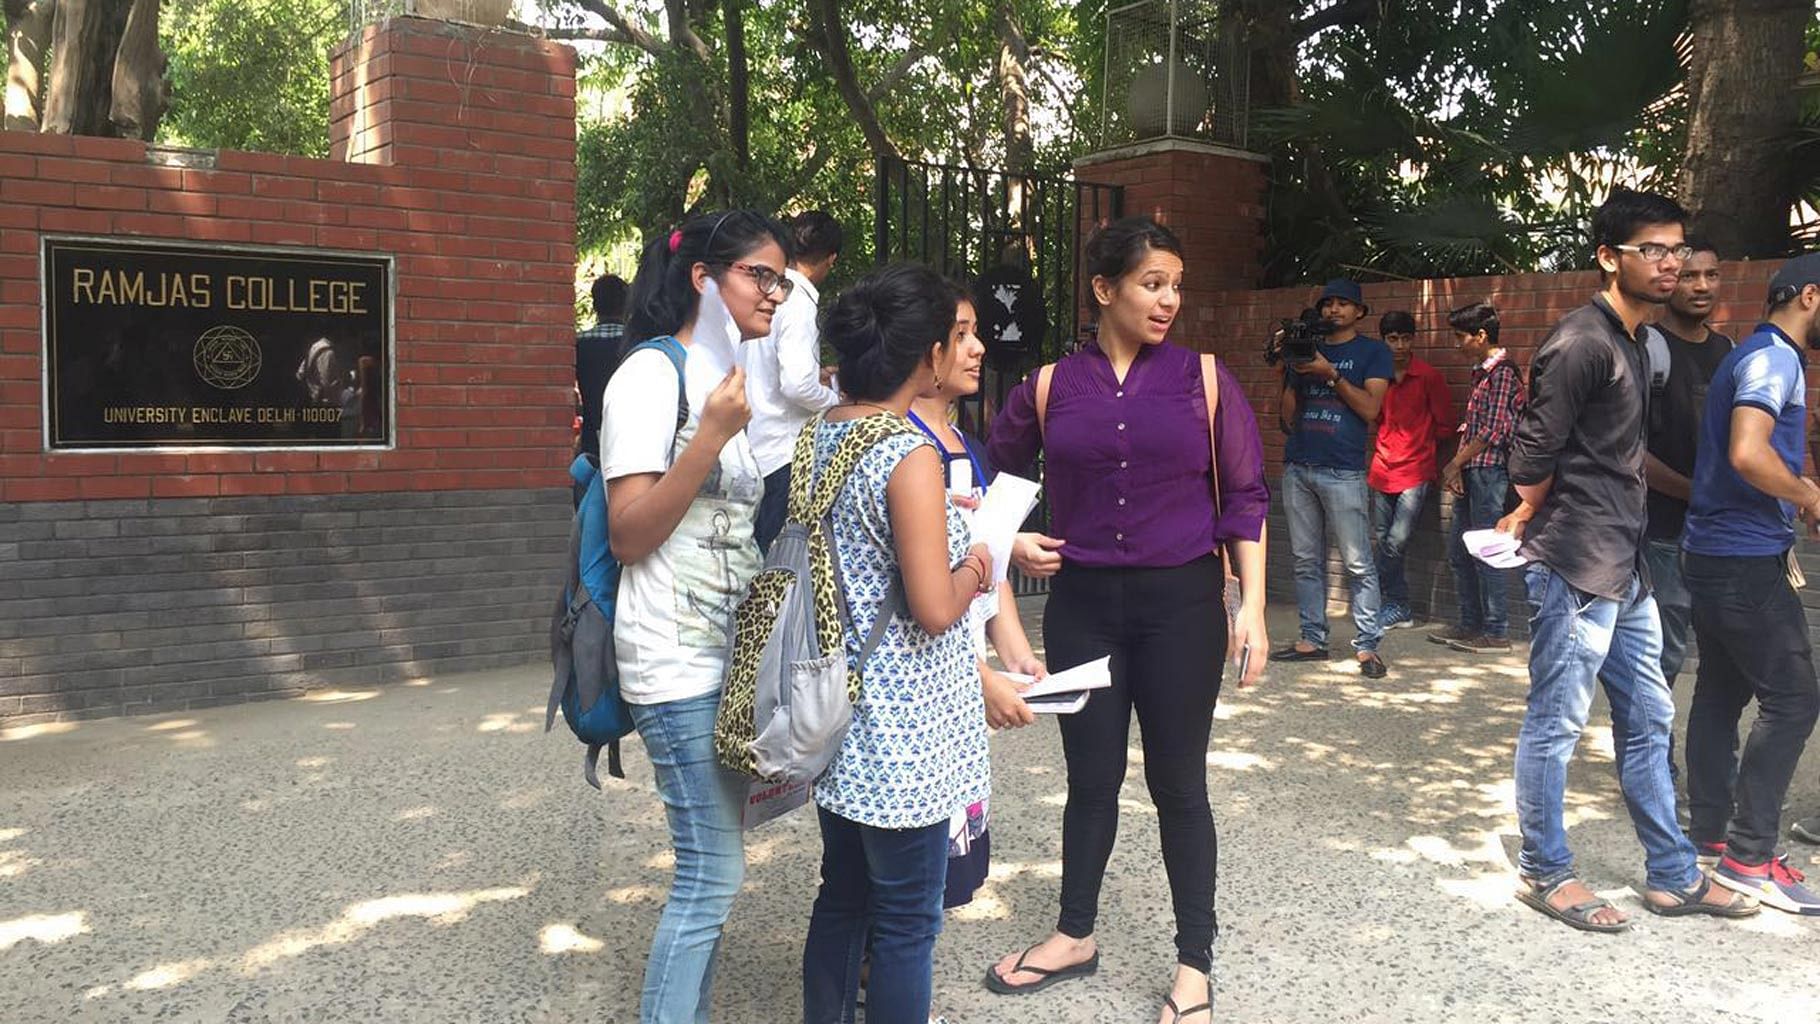 Students waiting outside Ramjas College in Delhi on Thursday, 30 June 2016. (Photo: <b>The Quint</b>)